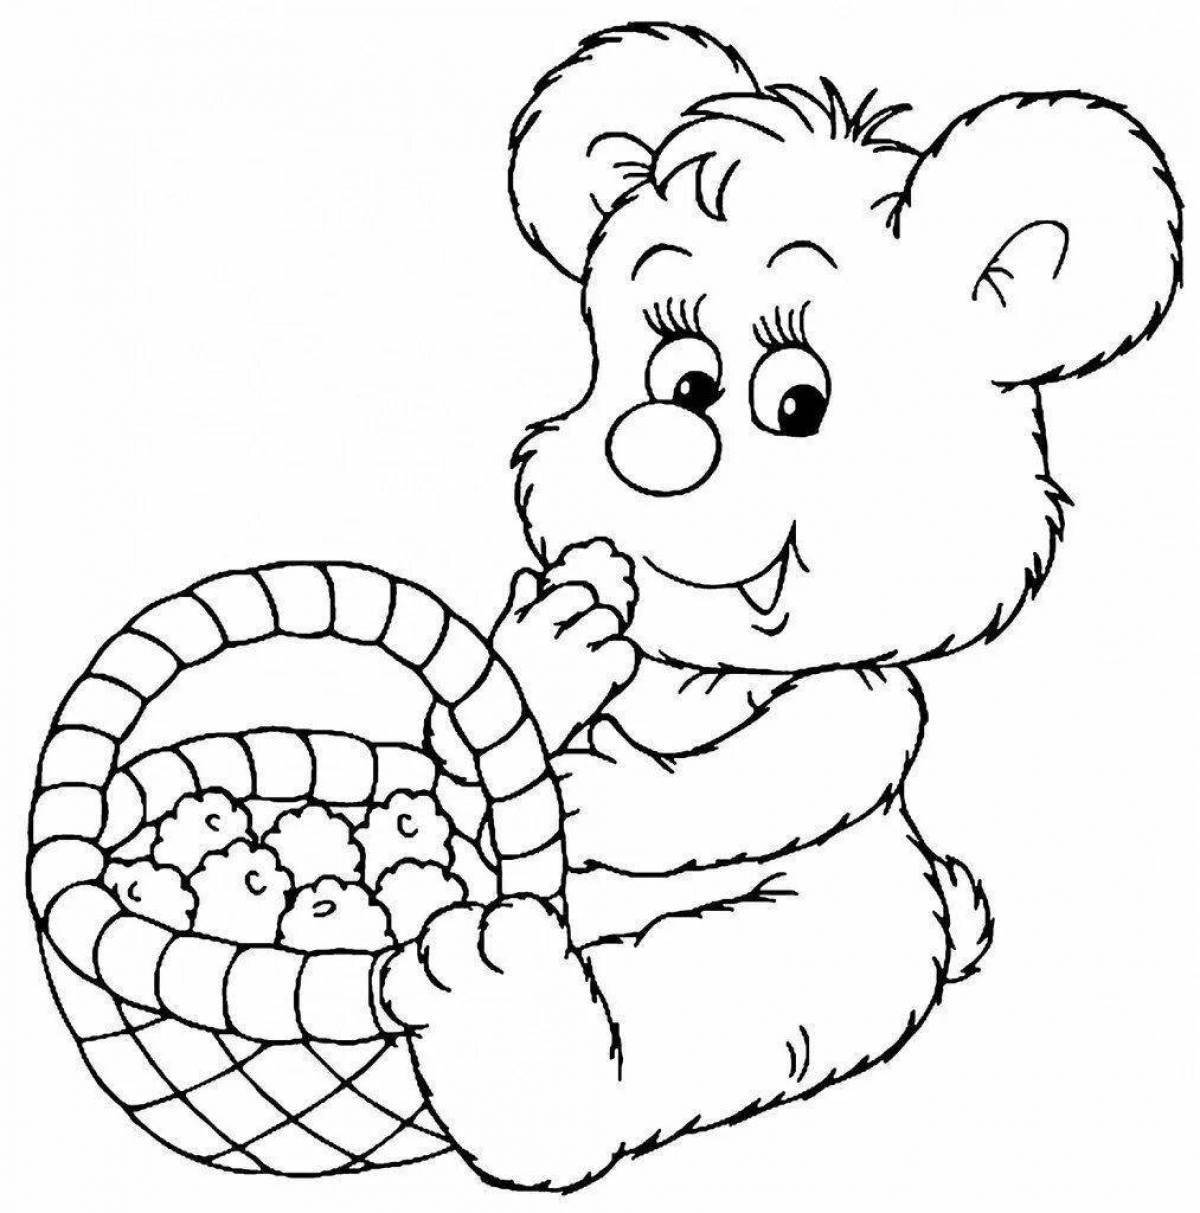 Animated coloring pages for kids with animals